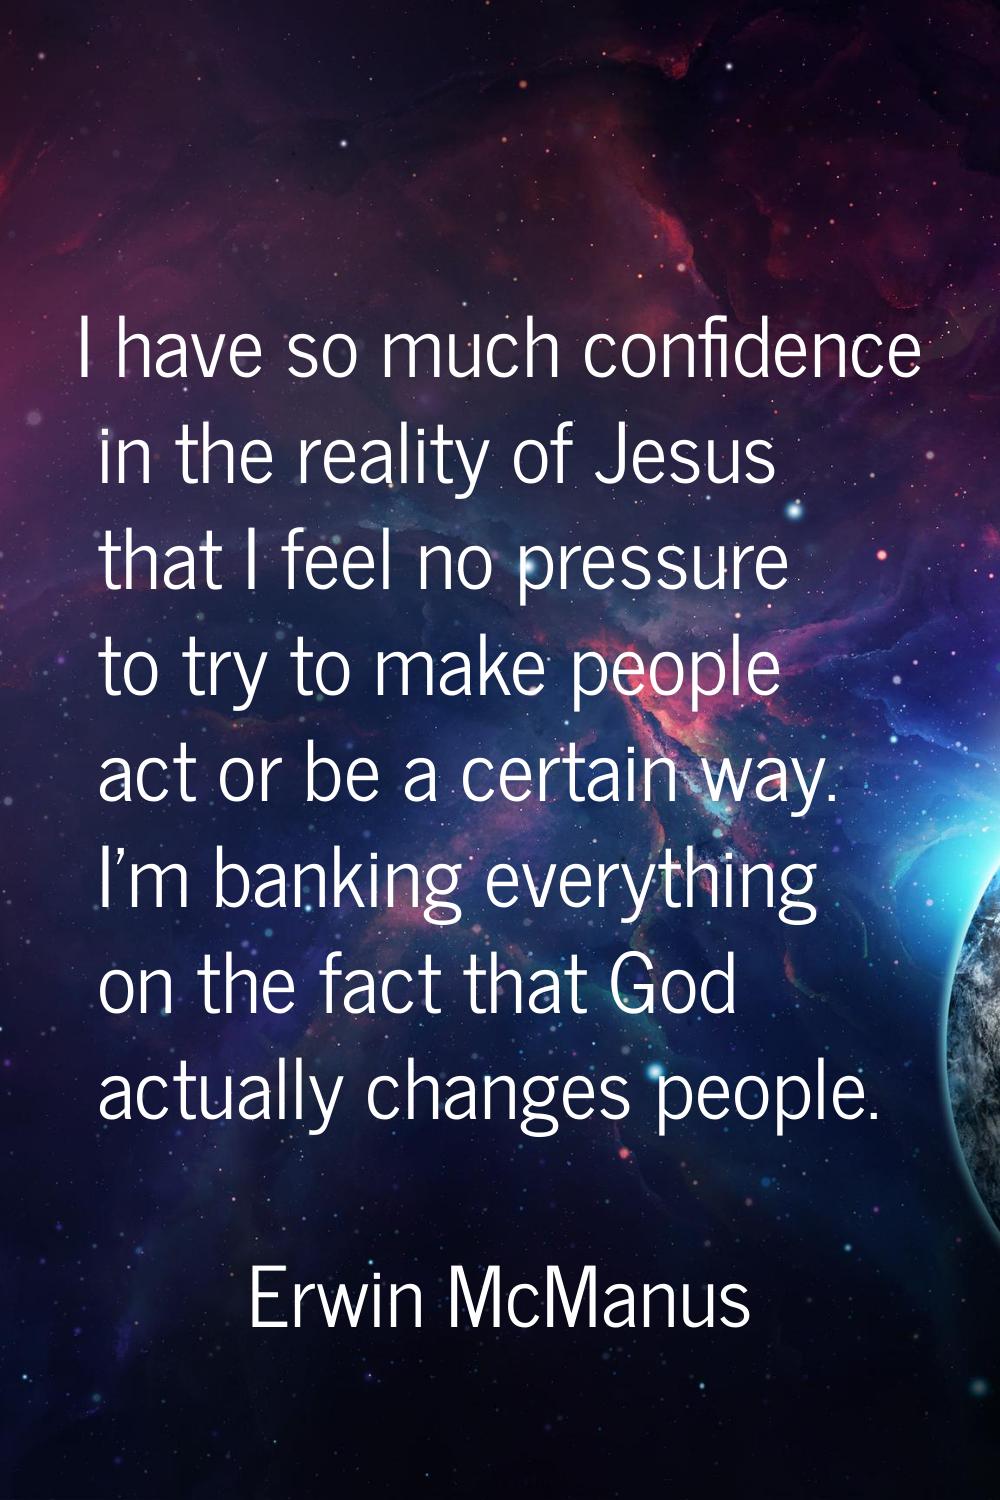 I have so much confidence in the reality of Jesus that I feel no pressure to try to make people act